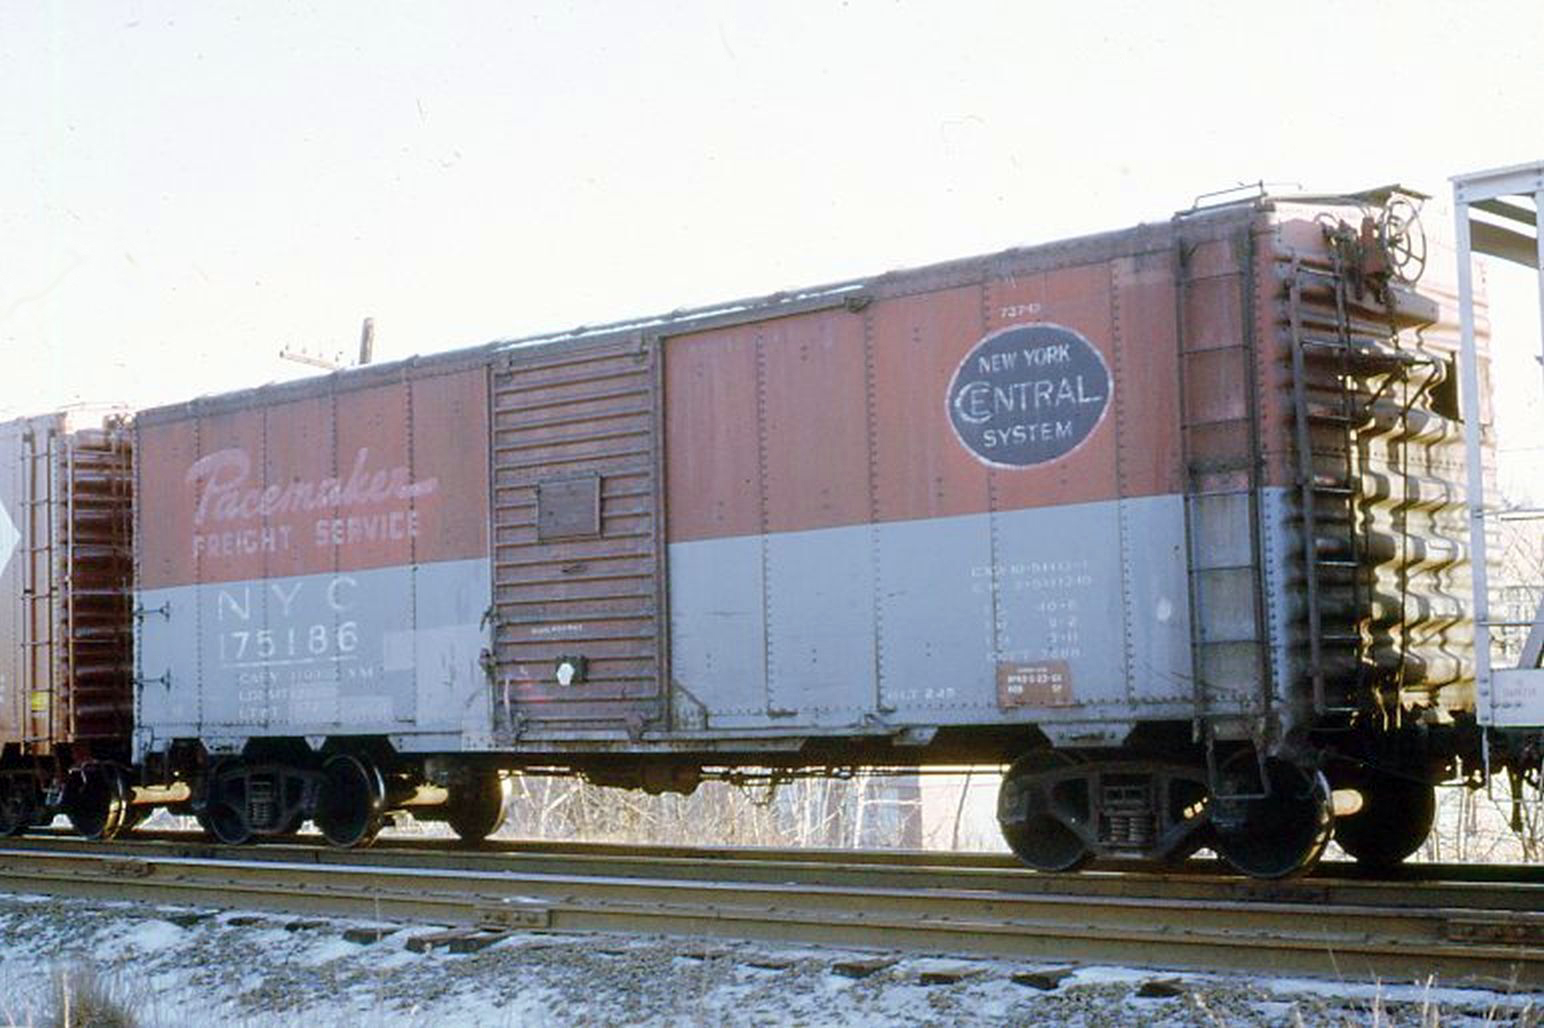 NYC boxcar in the "Pacemaker" scheme